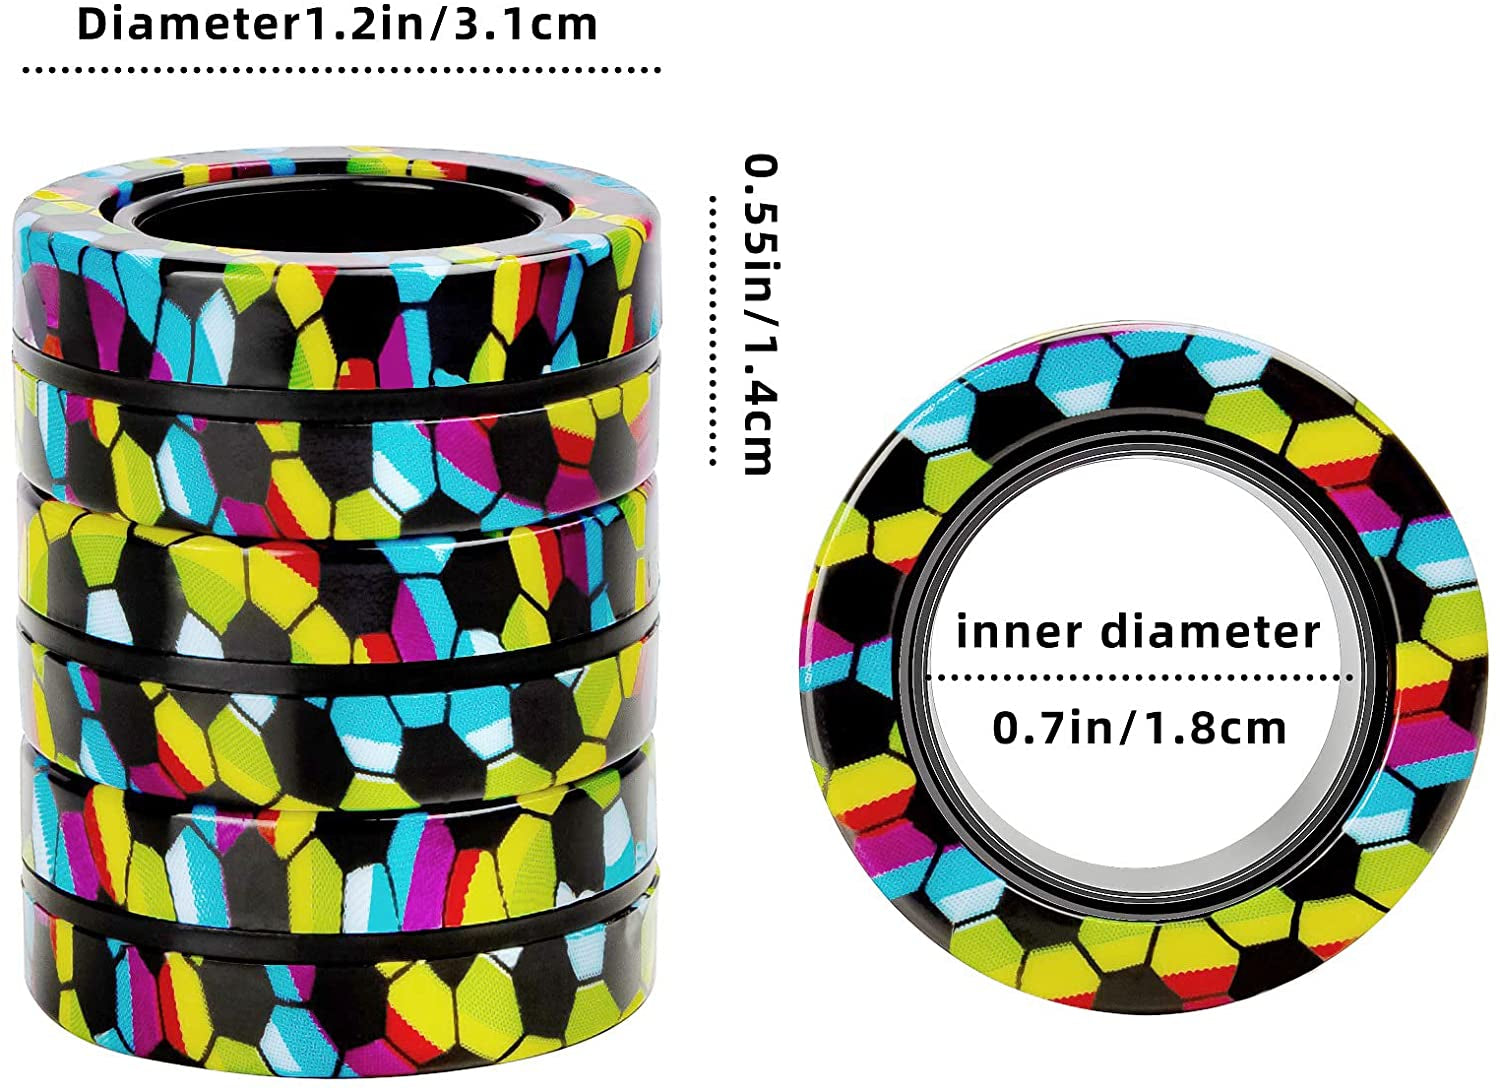 "Ultimate Magnetic Rings Fidget Toy Set - The Perfect Solution for ADHD, Anxiety Relief, and Endless Fun - Ideal Gift for Adults, Teens, and Kids (3PCS)"